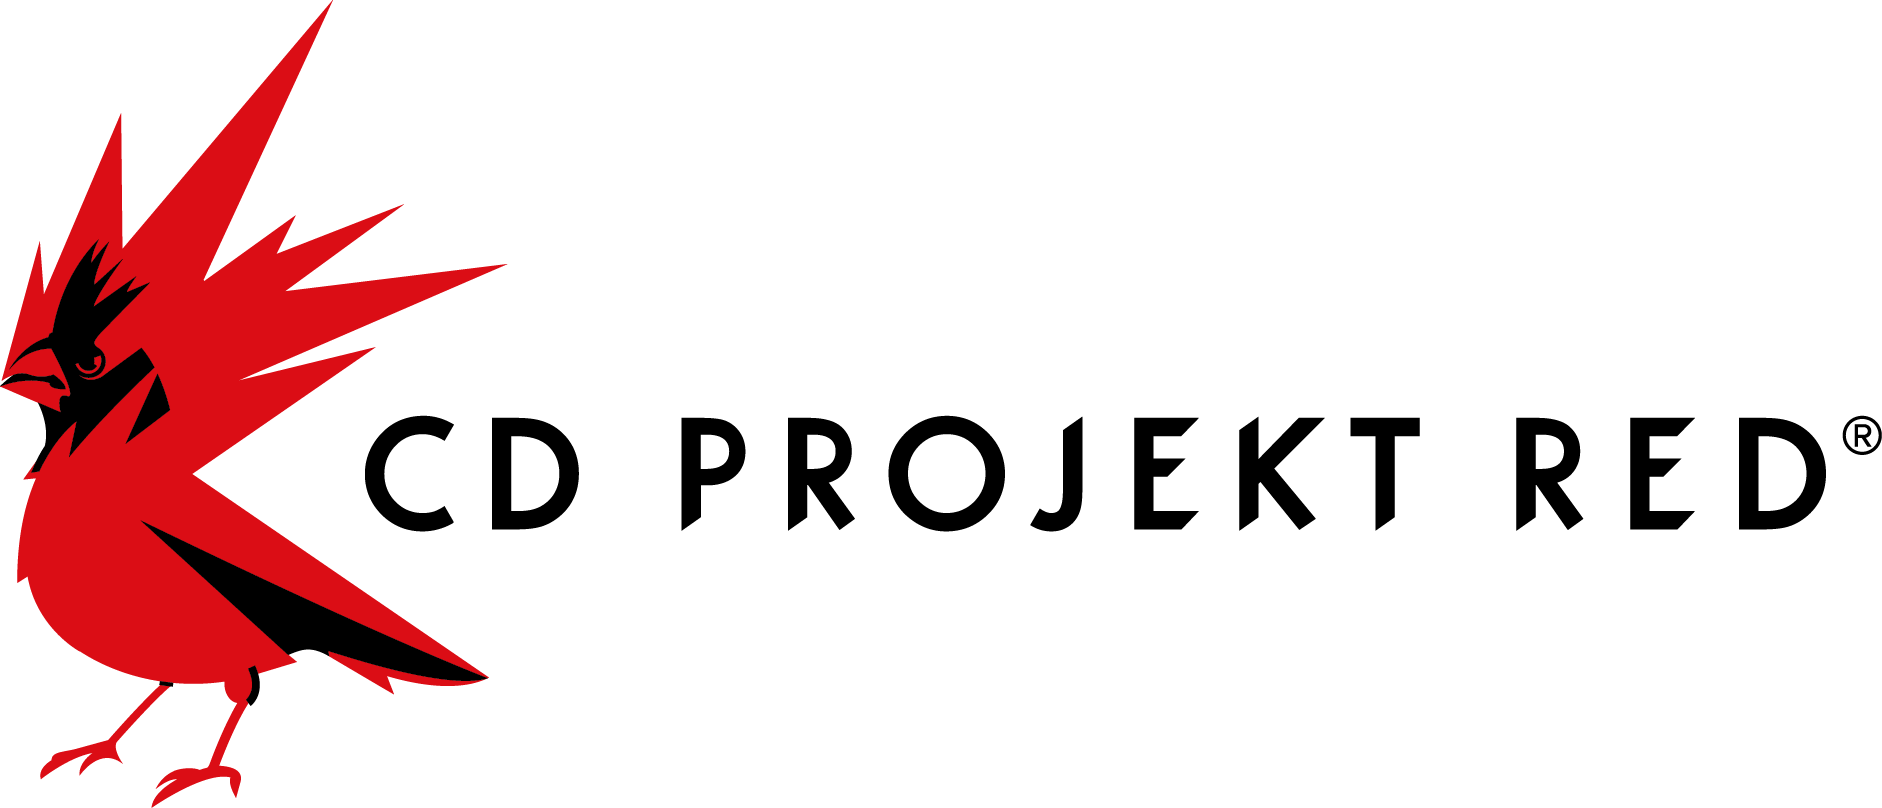 Red Bird Red a Logo - CD Projekt RED logo is now a REDbird to better reflect company's ...